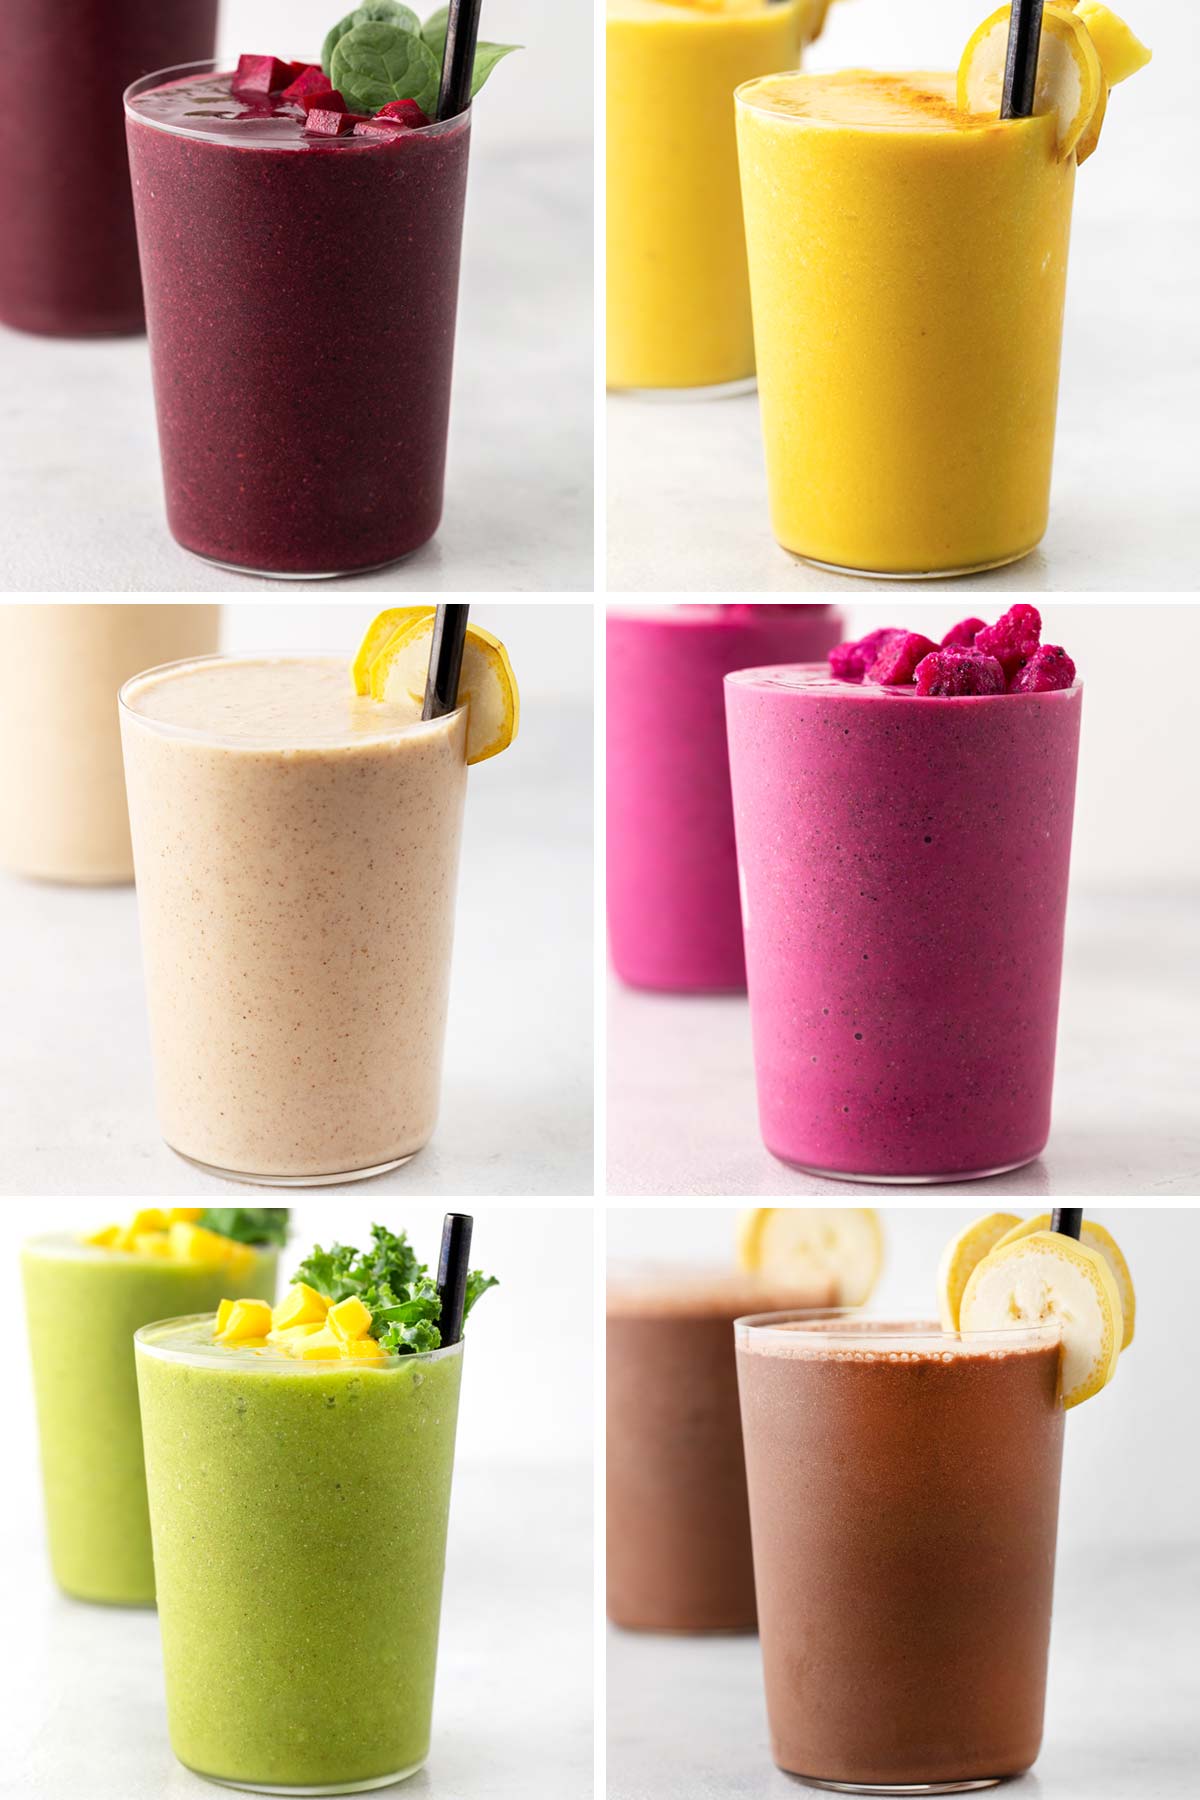 Six dairy-free smoothies.